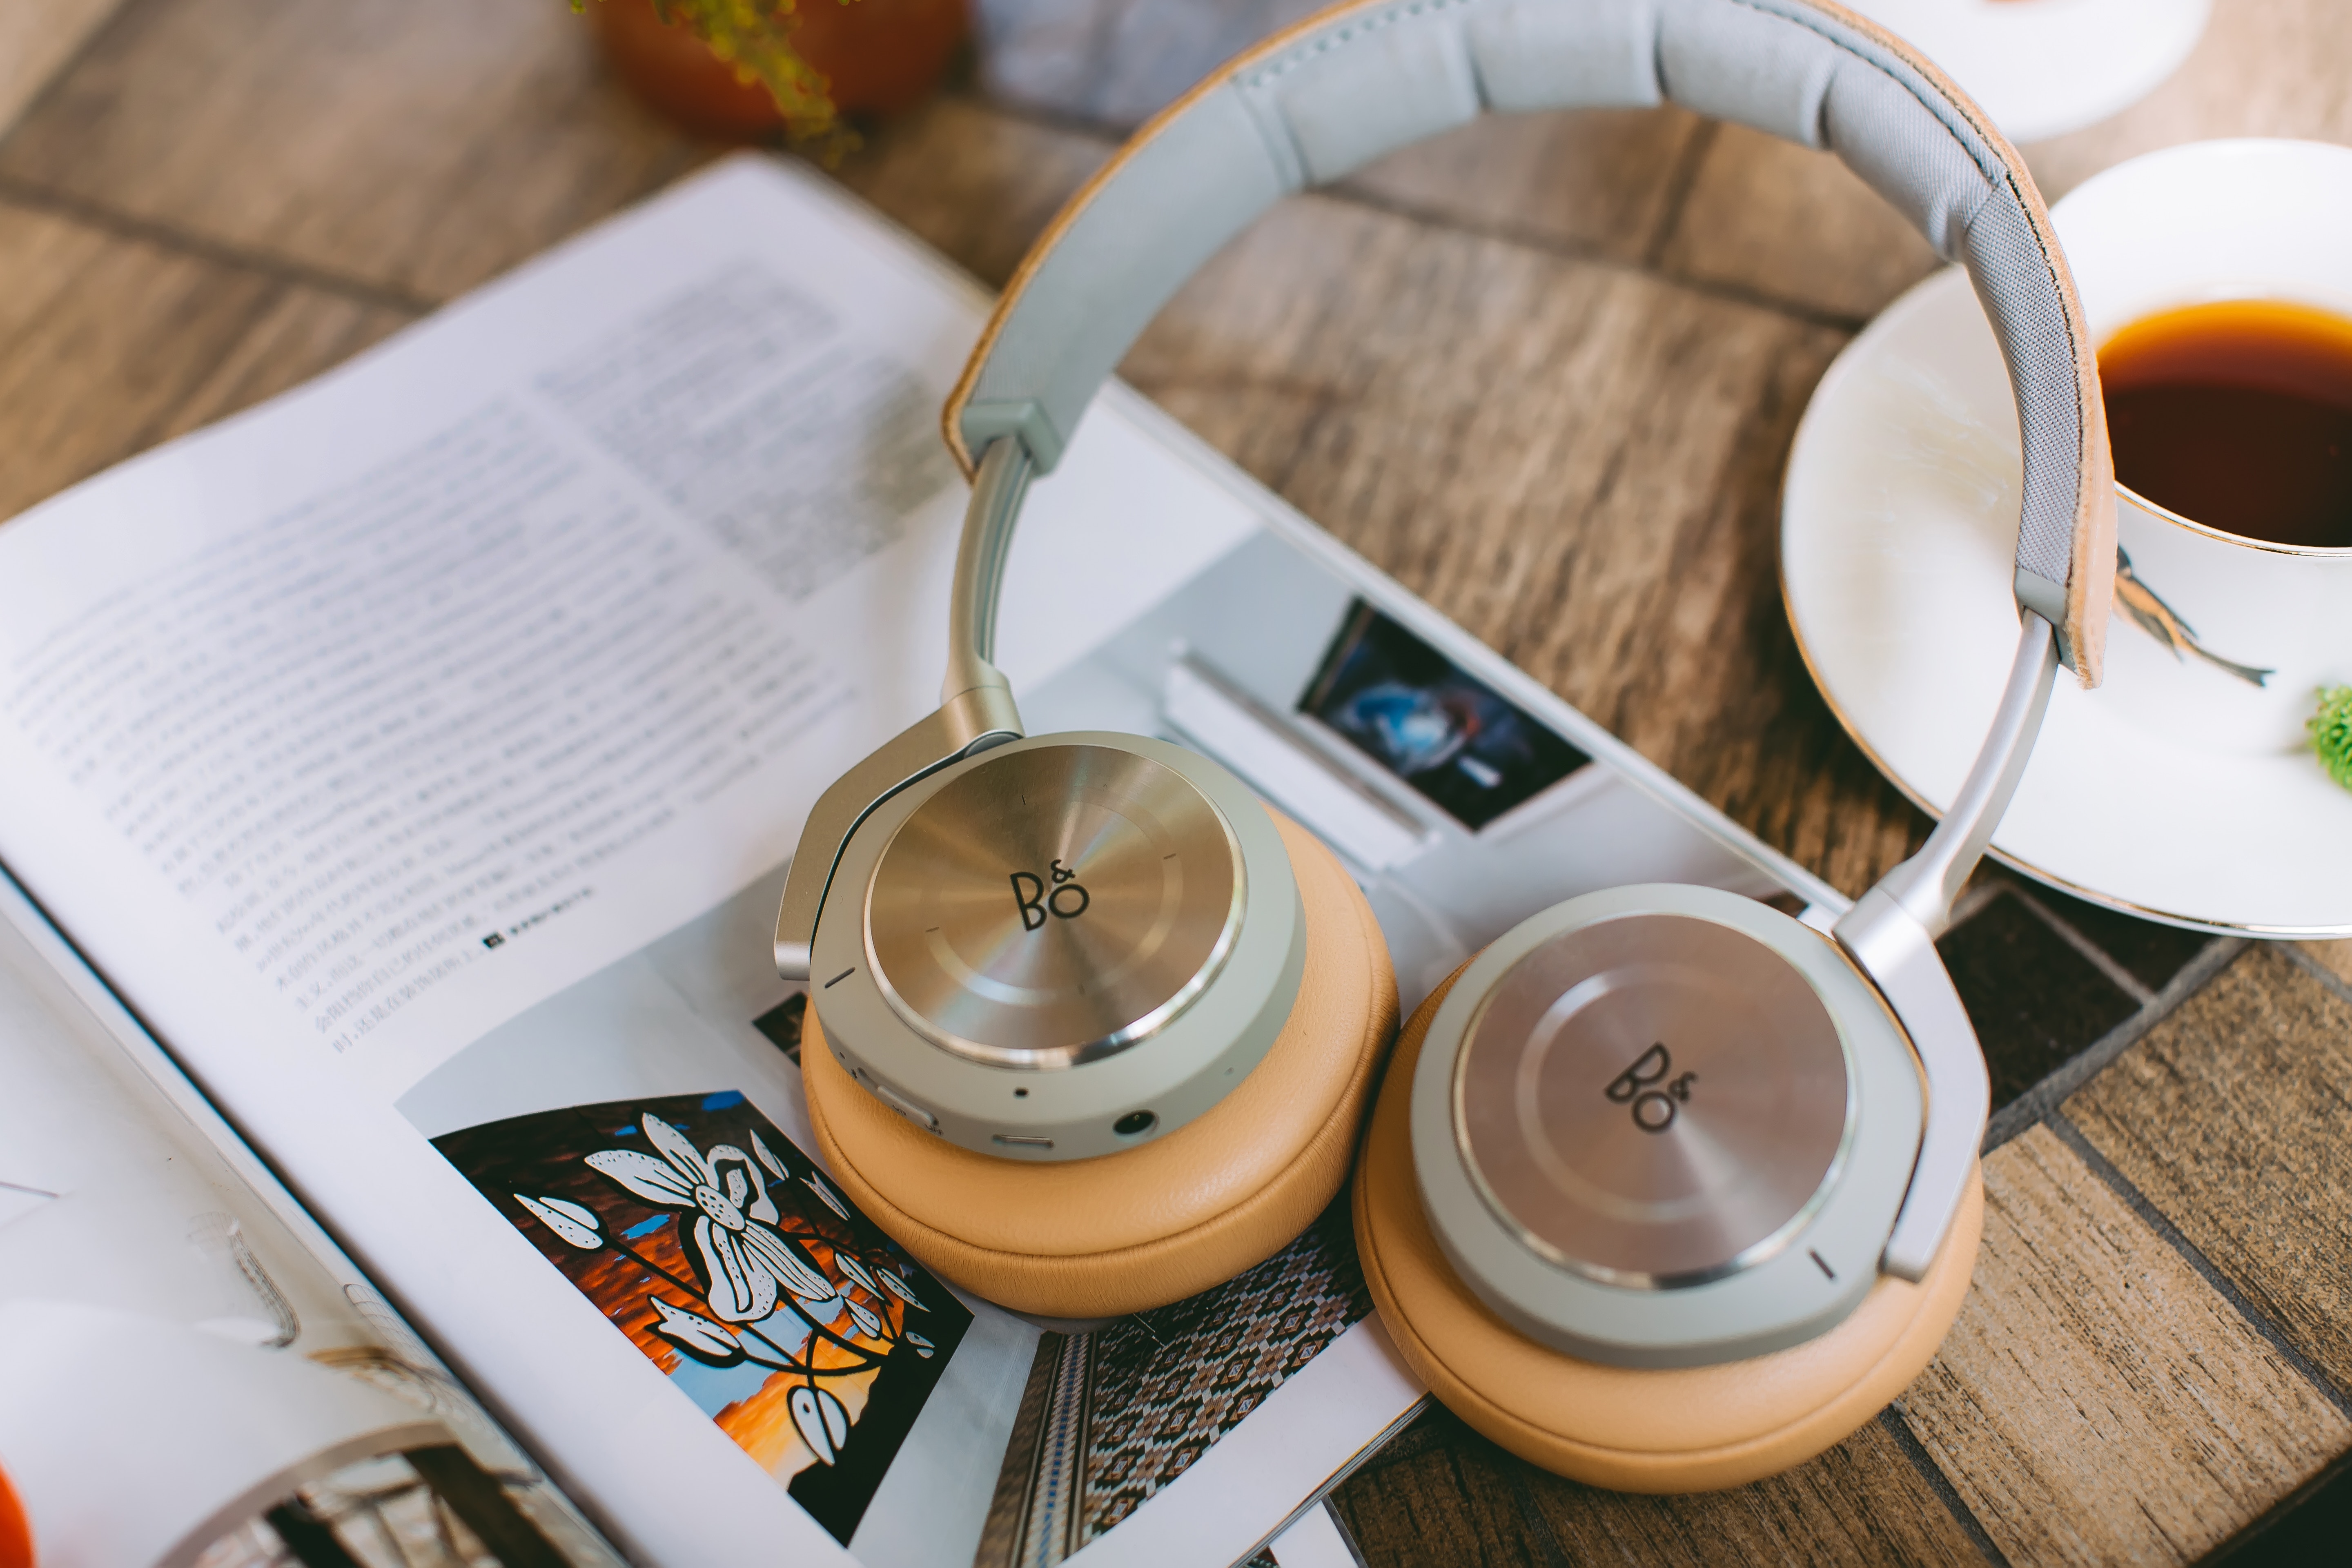 7 Audible Books To Download For Your Next Long-Haul Flight